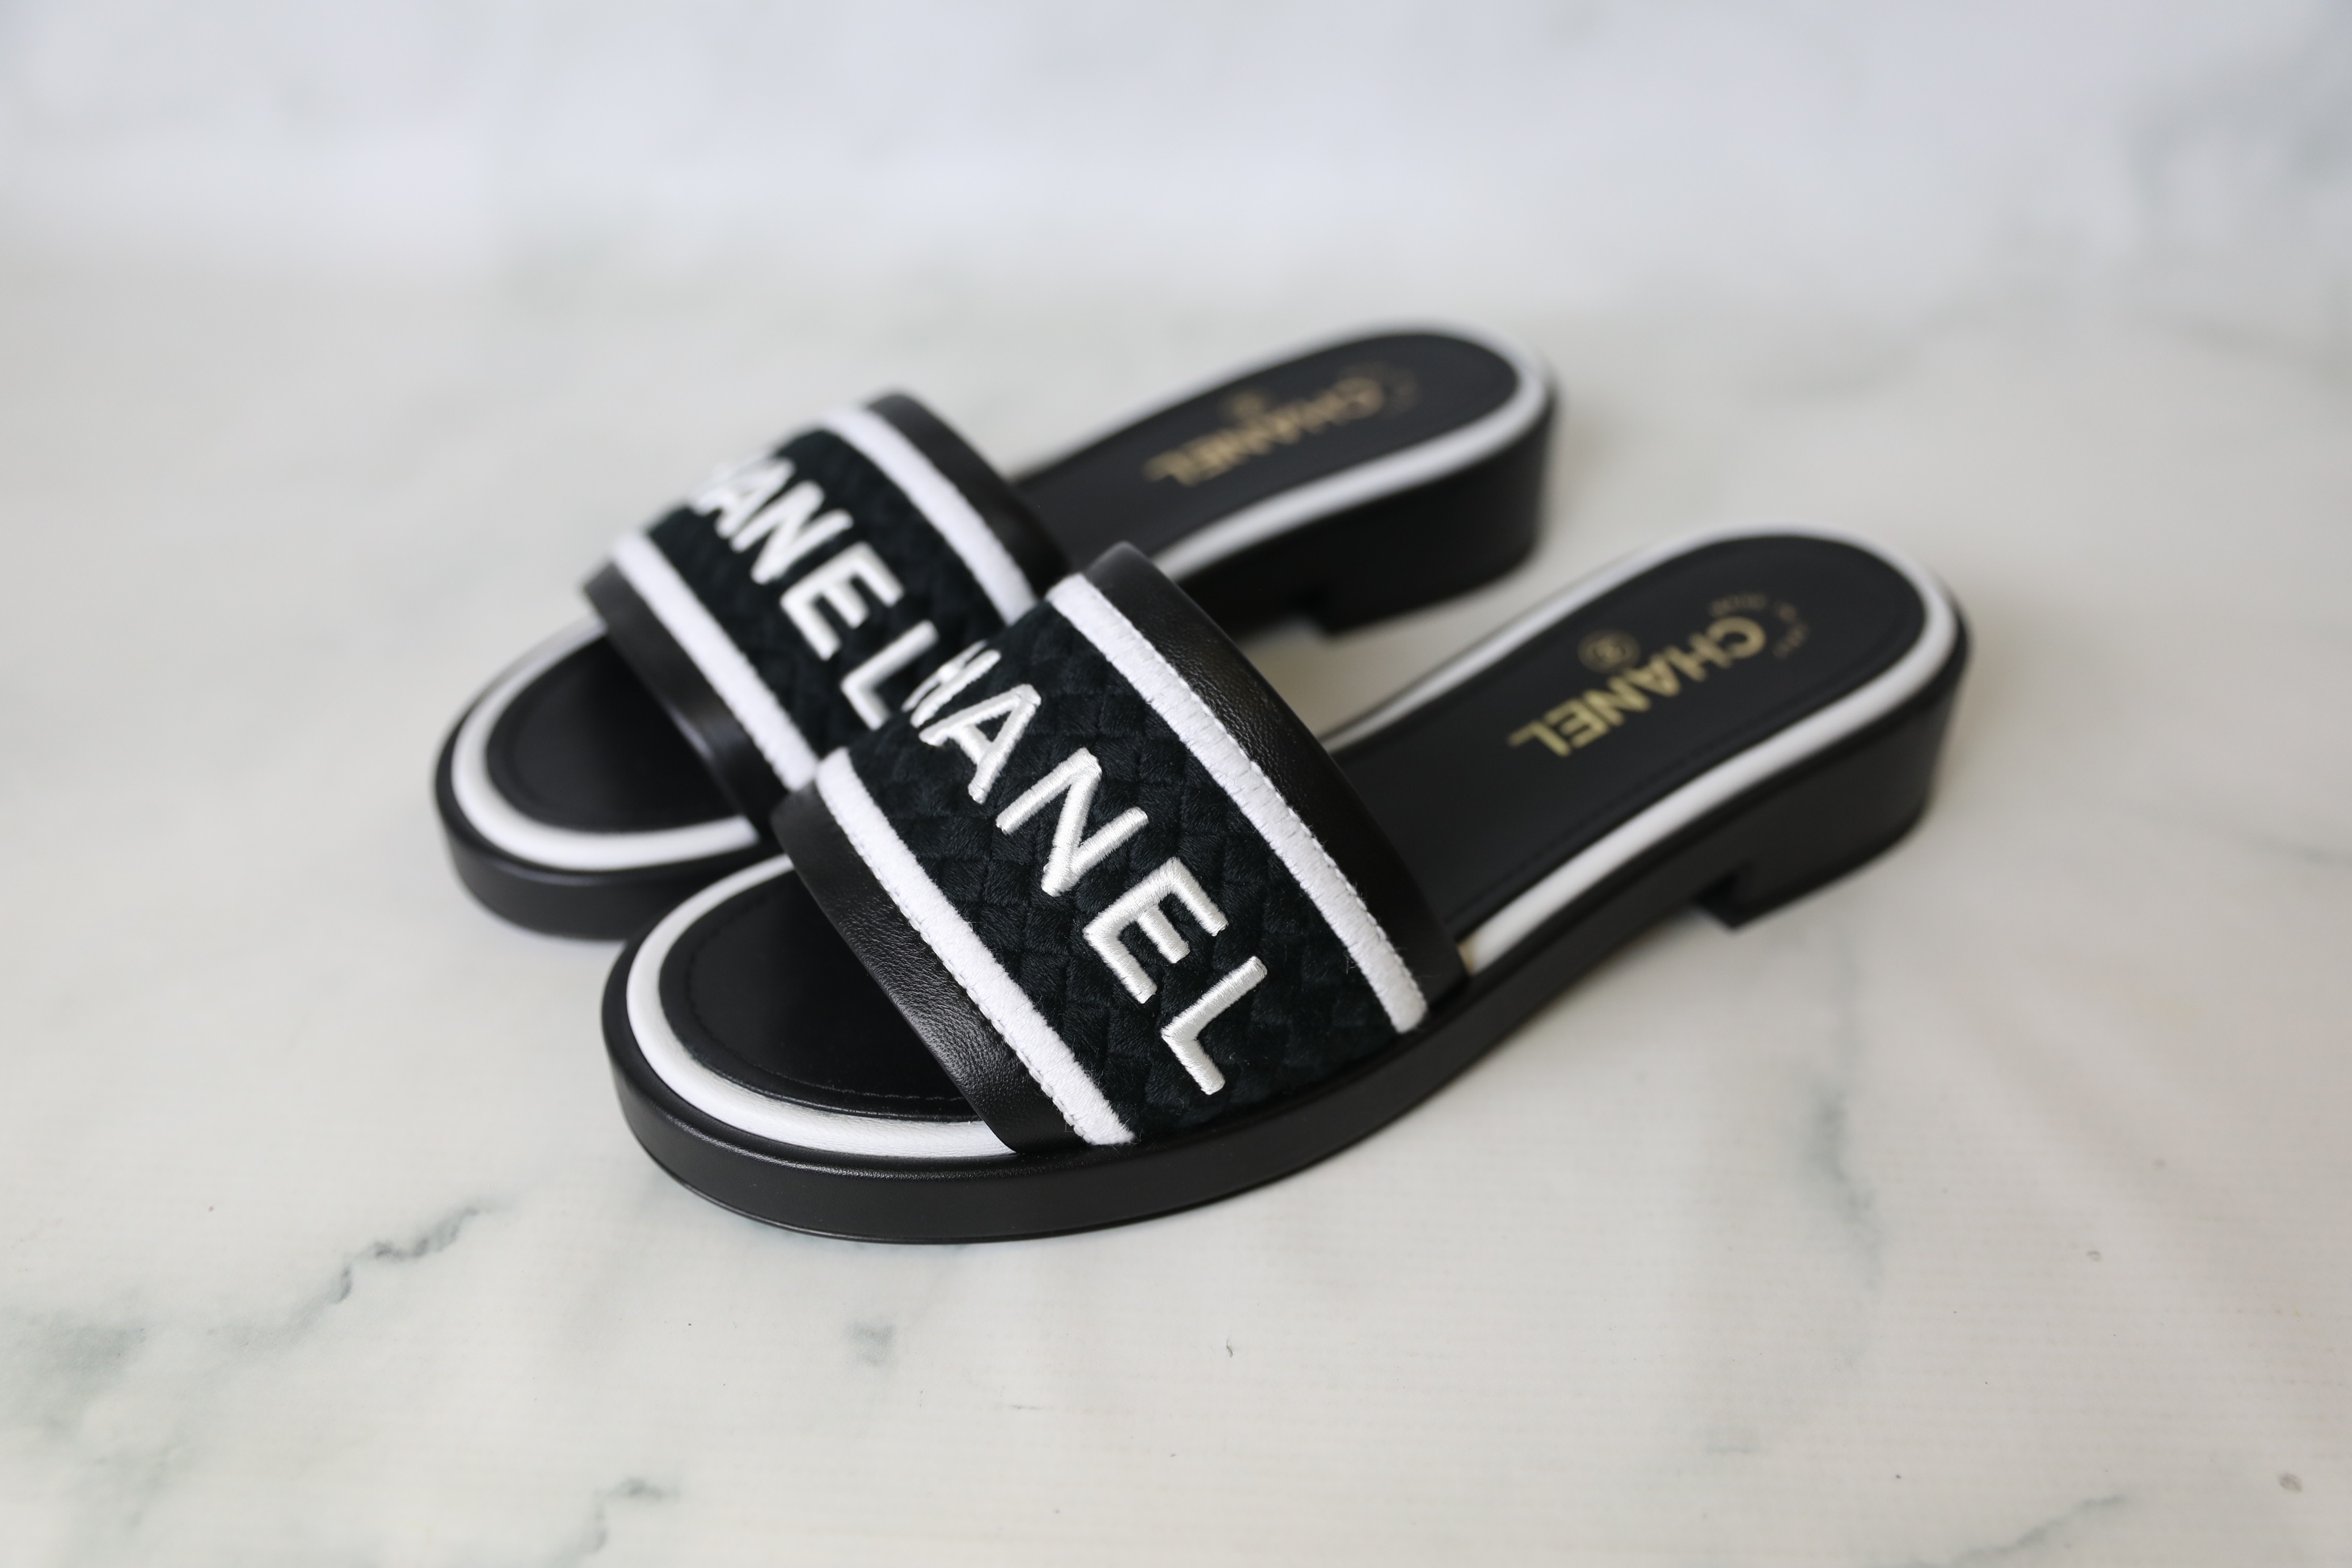 Chanel Shoes Slide Sandals, Black and White, Size 40, New in Box